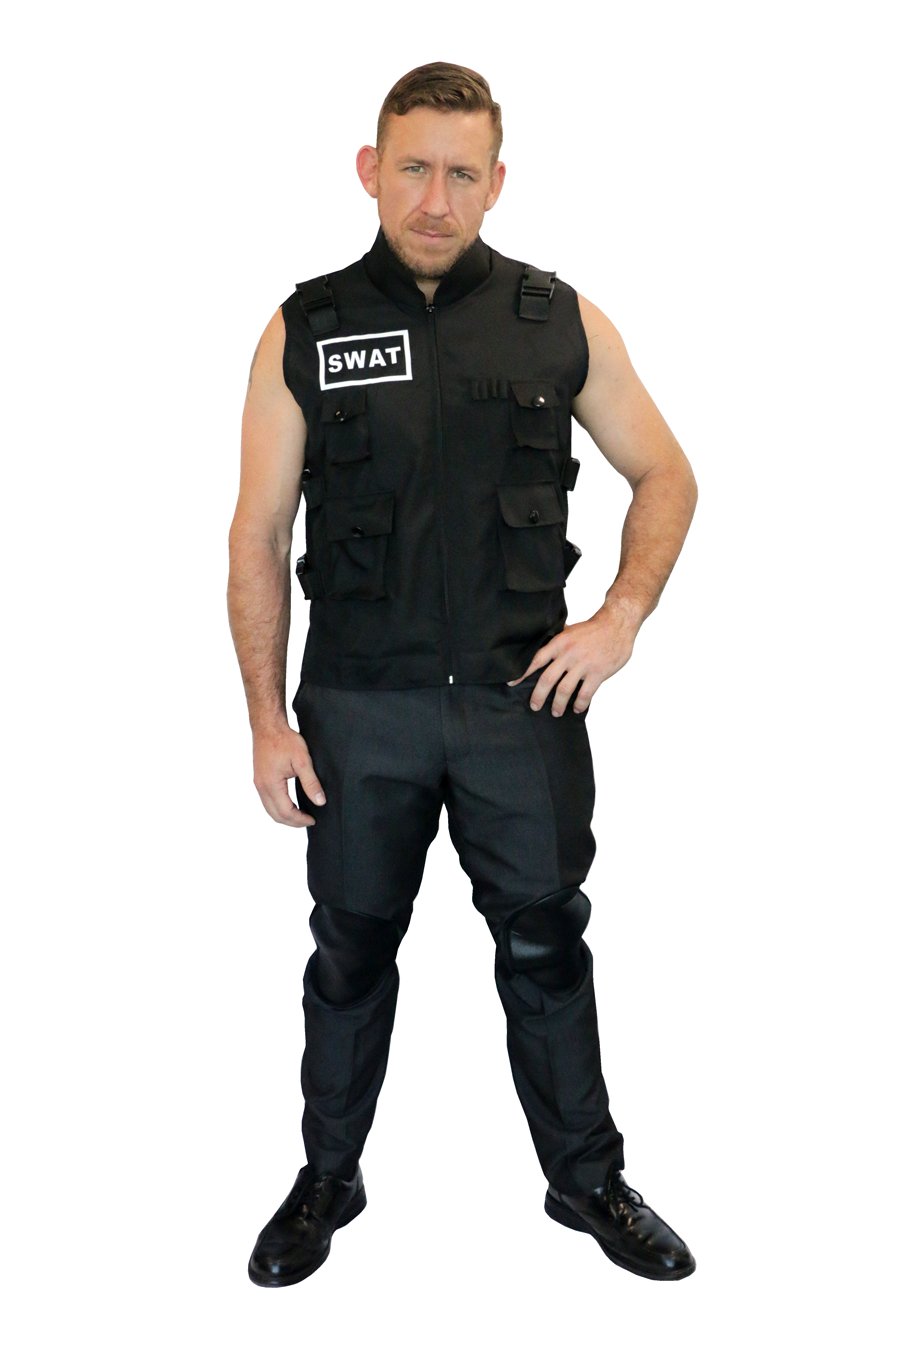 Costume Adult Swat Police Guard Large